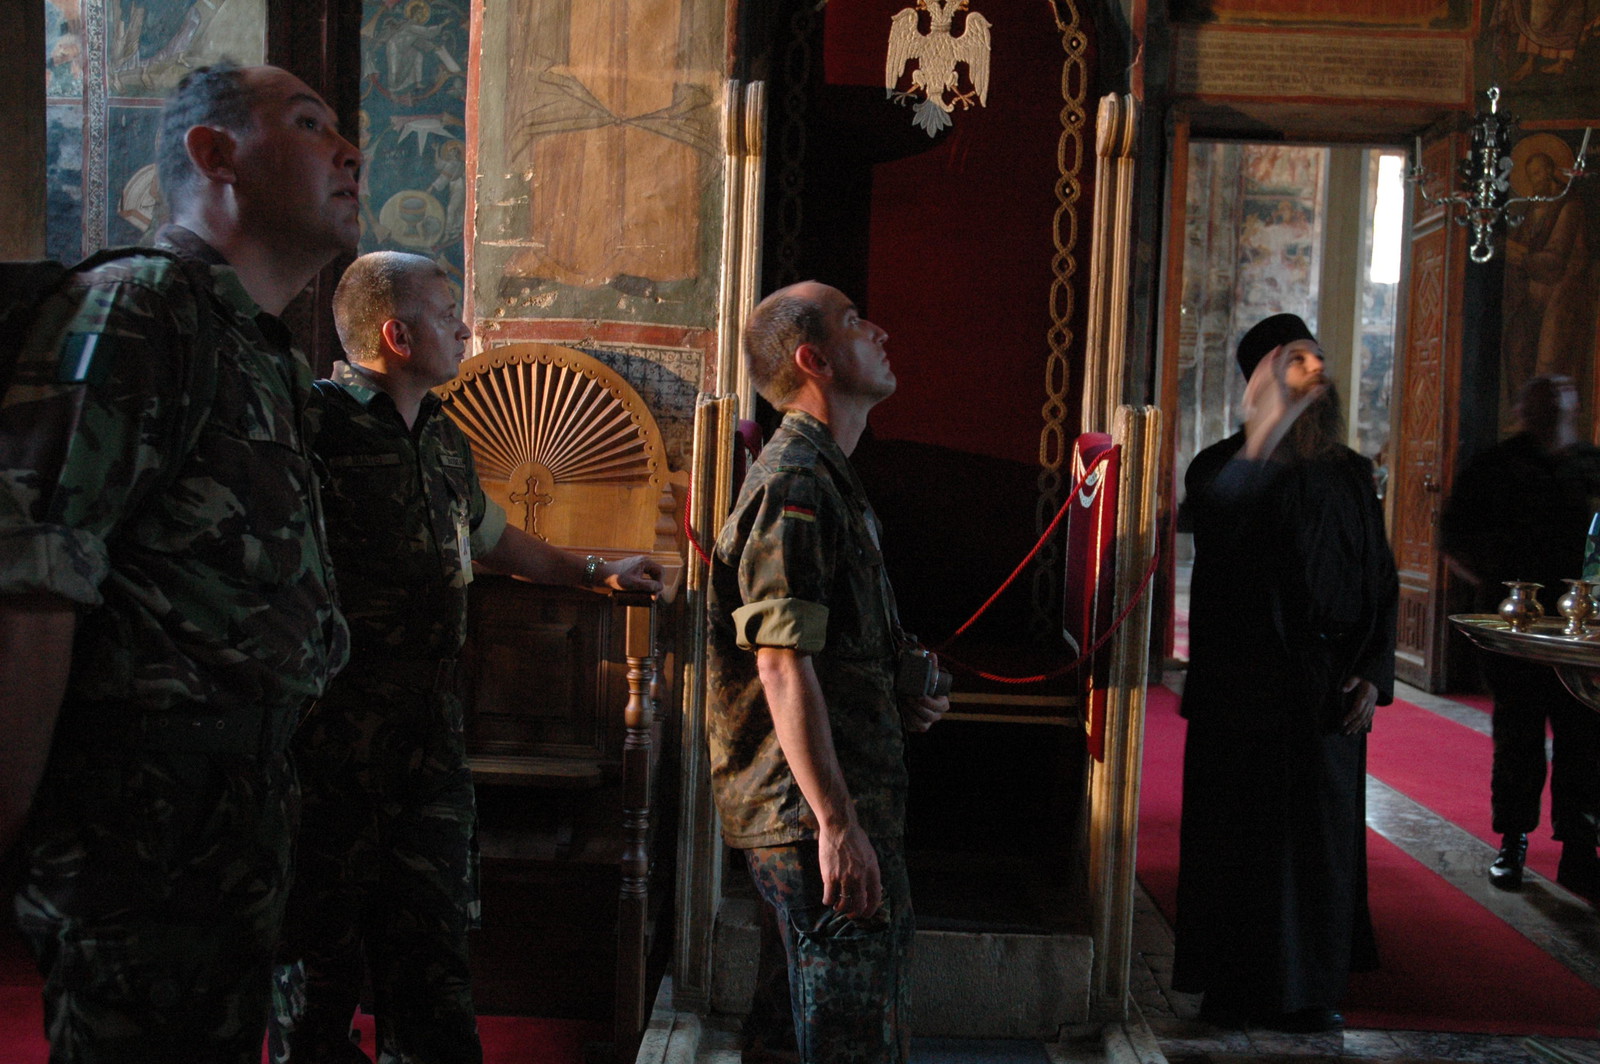 KFOR Soldiers visiting the Monastery 16